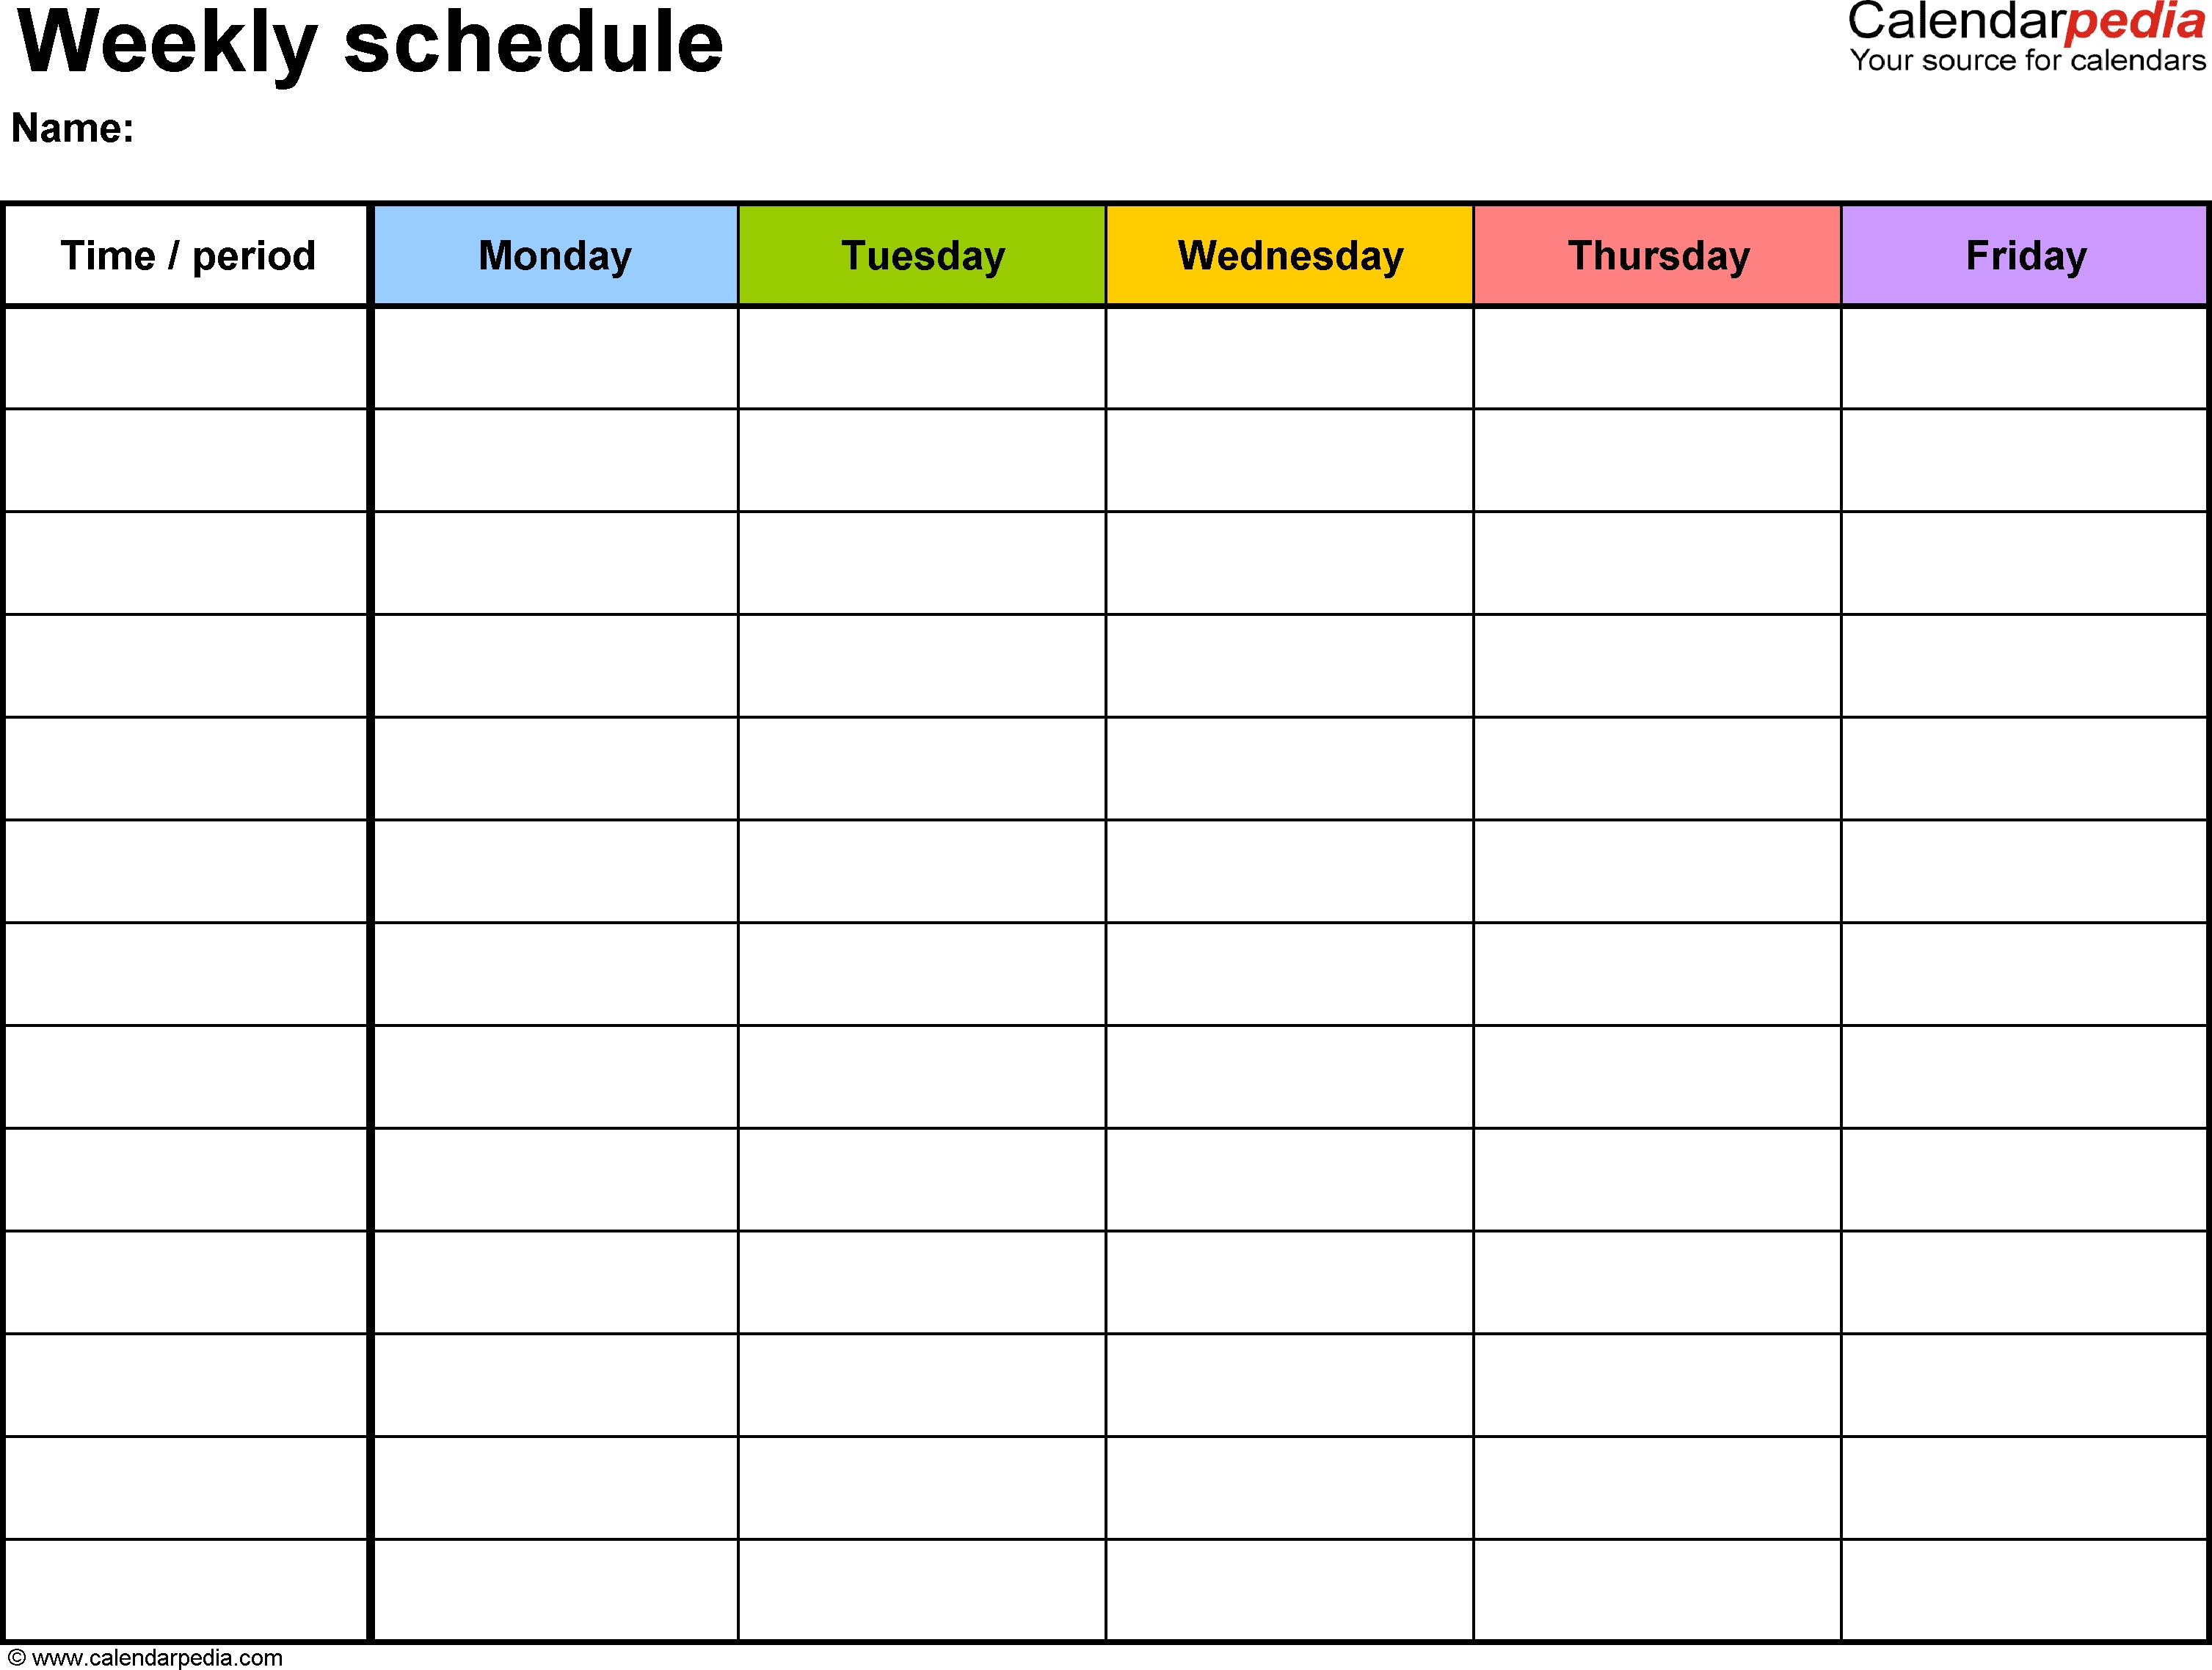 Free Weekly Schedule Templates For Word - 18 Templates Remarkable Printable Calendar In Word Format